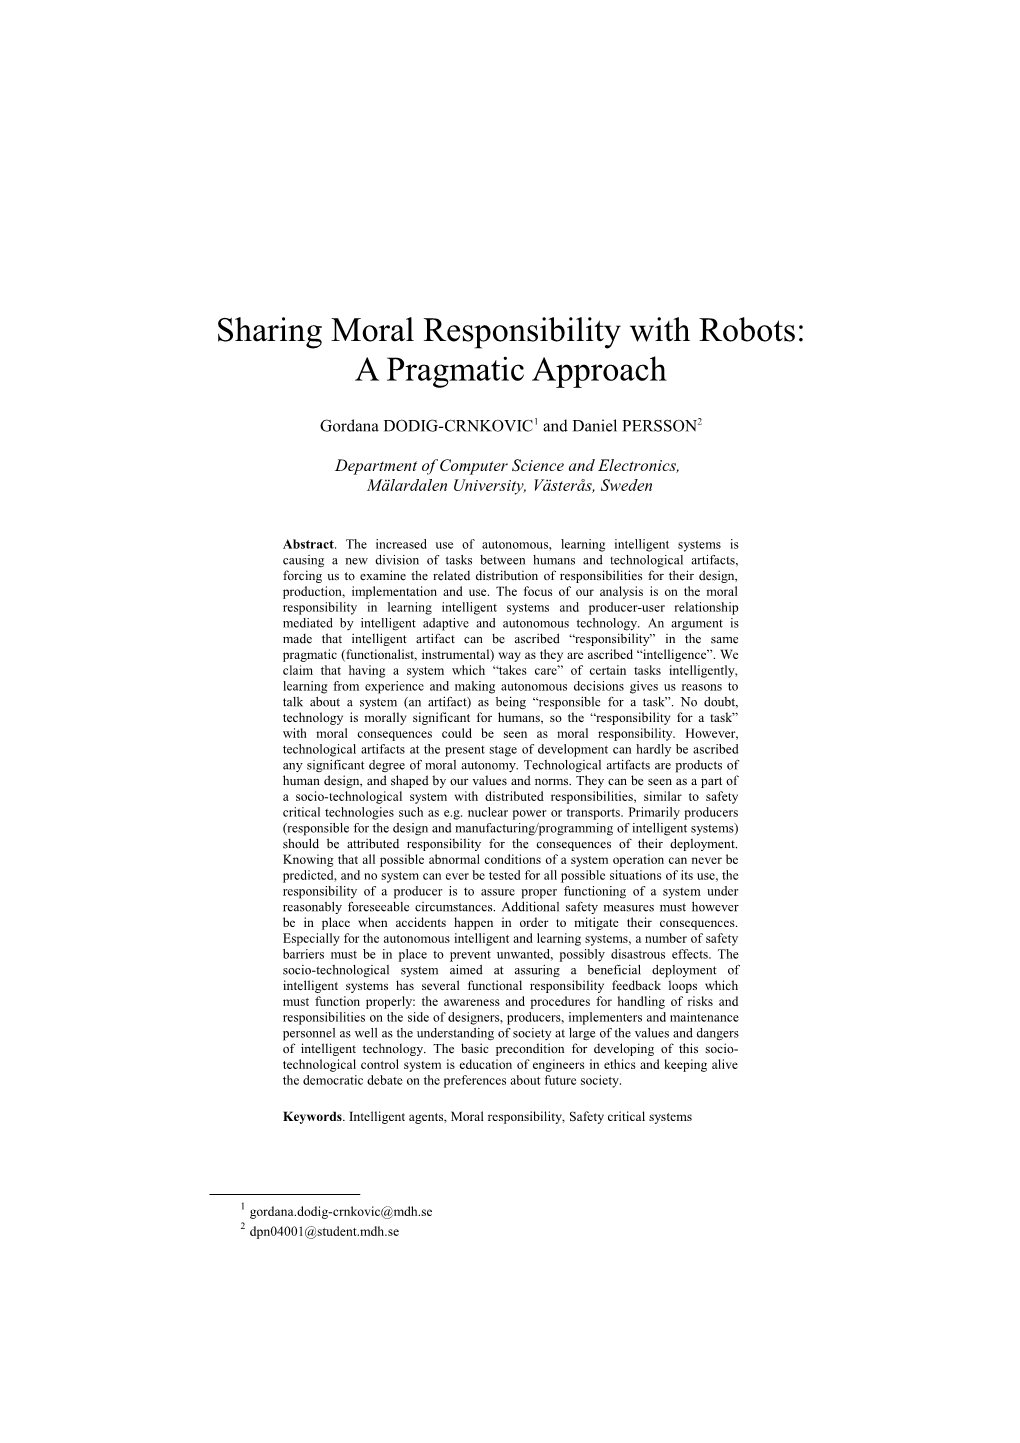 Sharing Moral Responsibility with Robots: a Pragmatic Approach